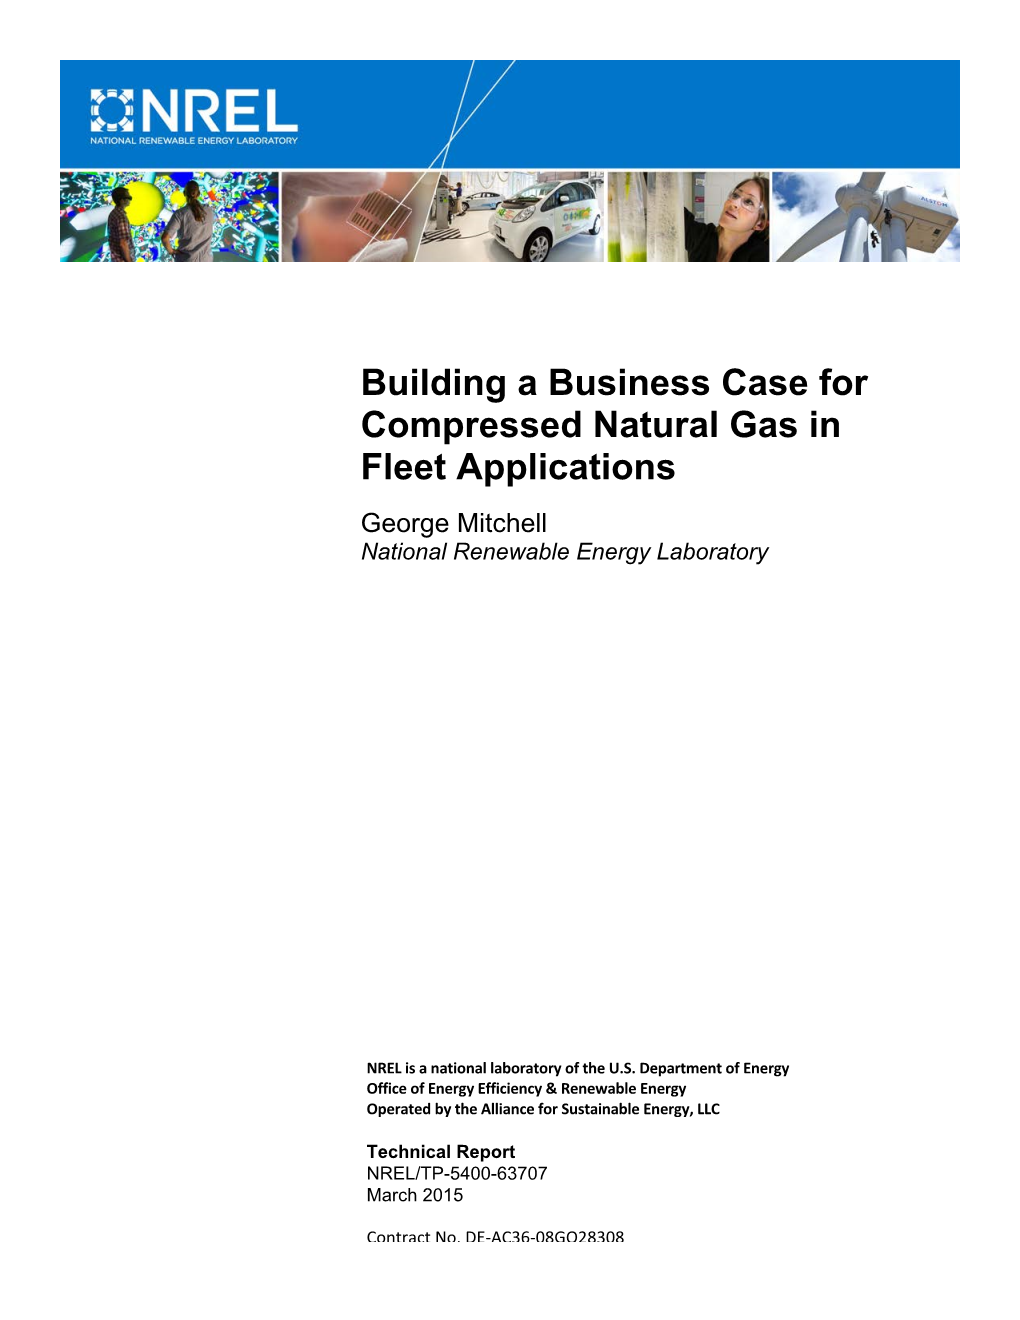 Building a Business Case for Compressed Natural Gas in Fleet Applications George Mitchell National Renewable Energy Laboratory